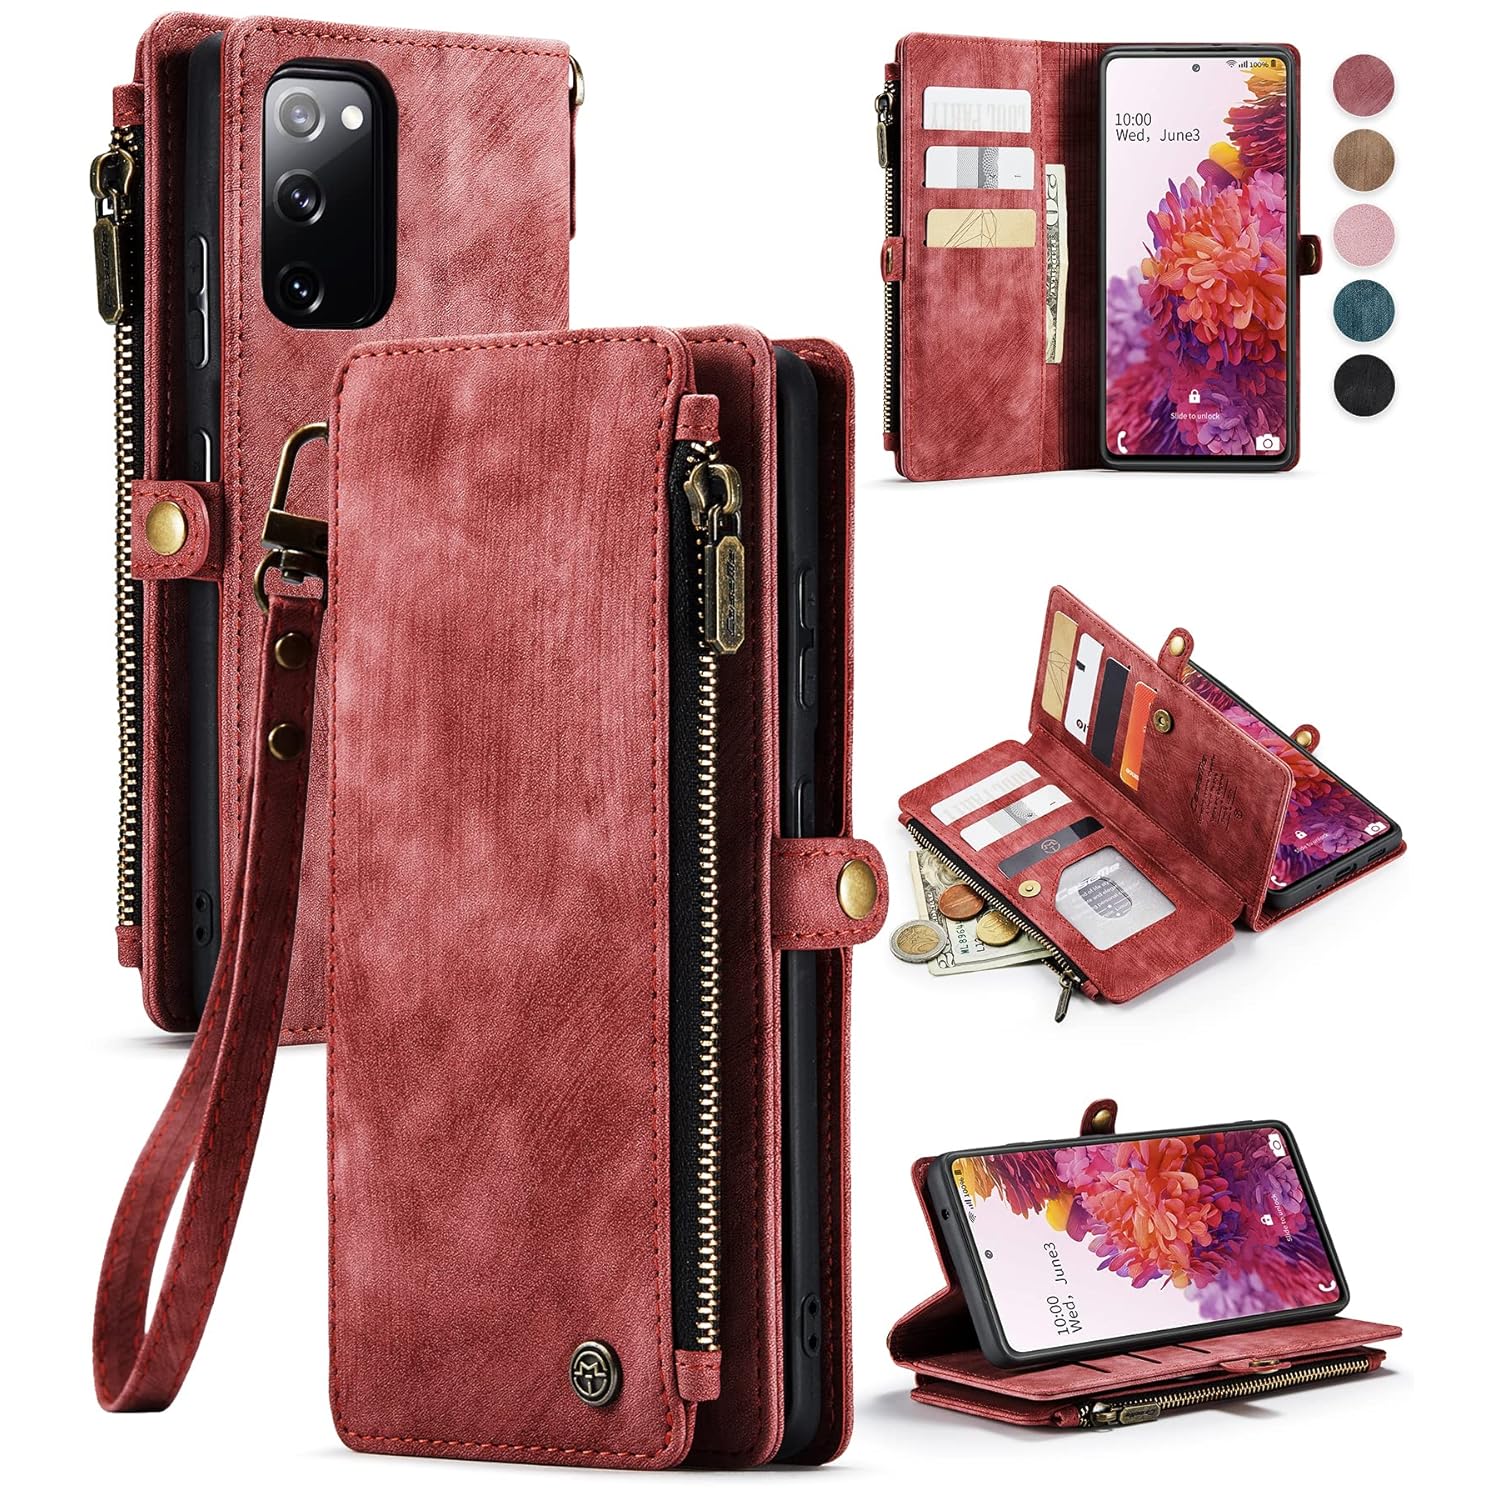 Great Choice Products Samsung Galaxy S20 Fe Case, Samsung S20 Fe Case Wallet For Women Men, Durable Pu Leather Magnetic Flip Lanyard Strap Wristlet…